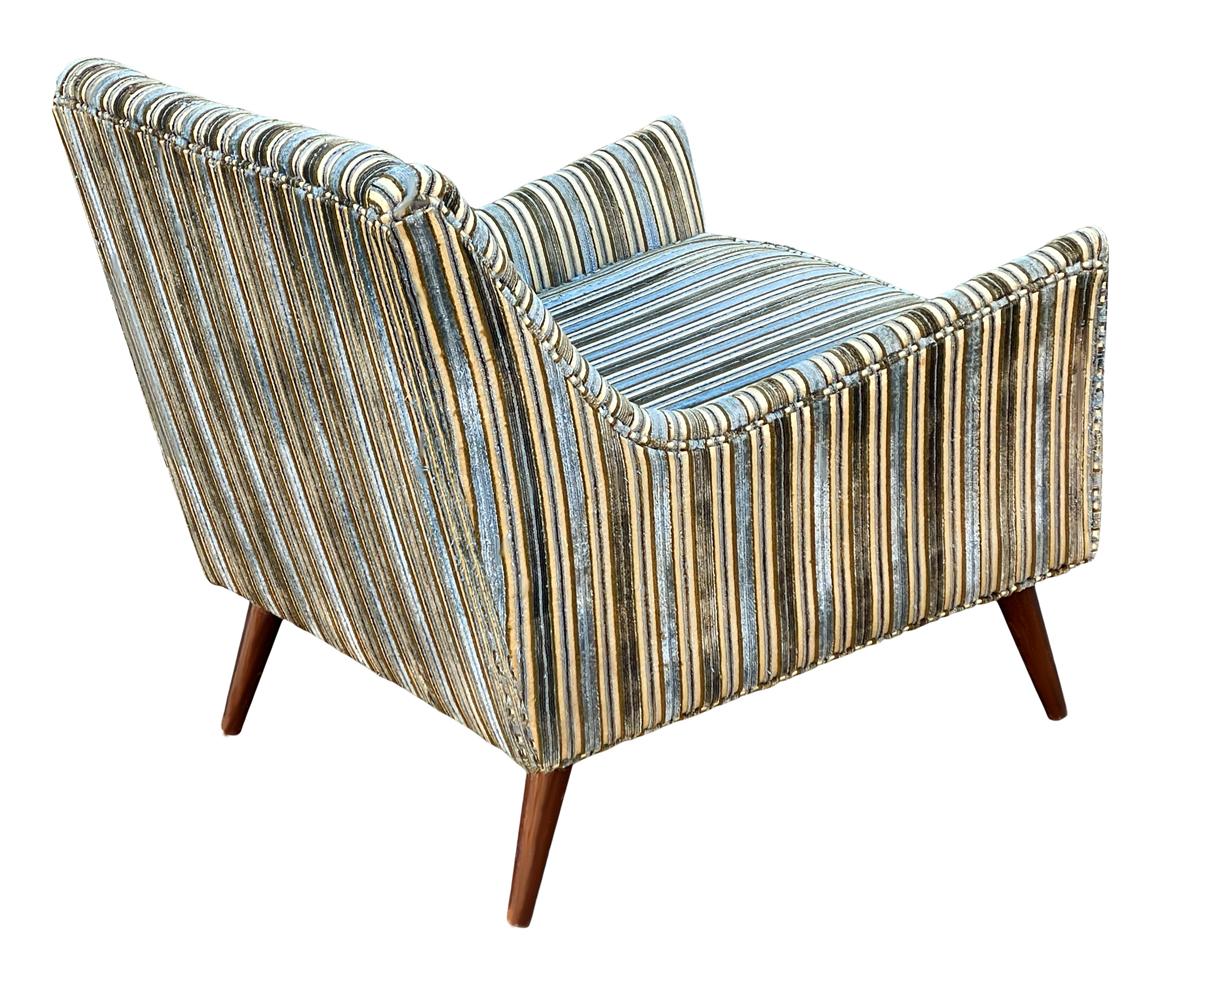 Pair of Mid-Century Modern Sculptural Lounge Chairs in the the of Harvey Probber For Sale 2